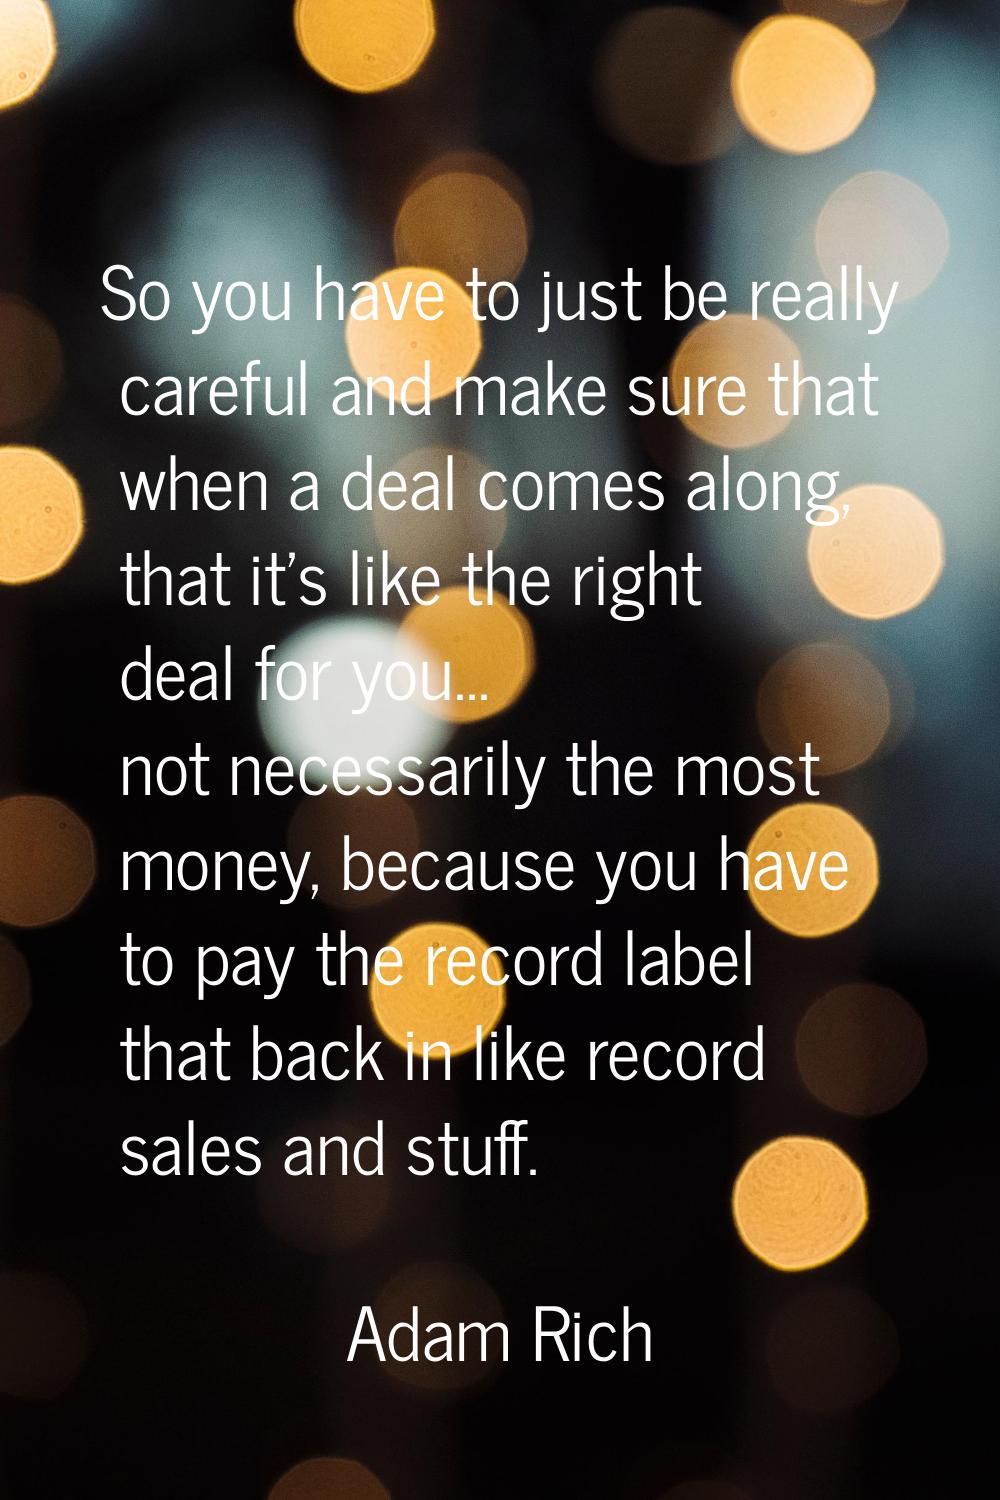 So you have to just be really careful and make sure that when a deal comes along, that it's like th